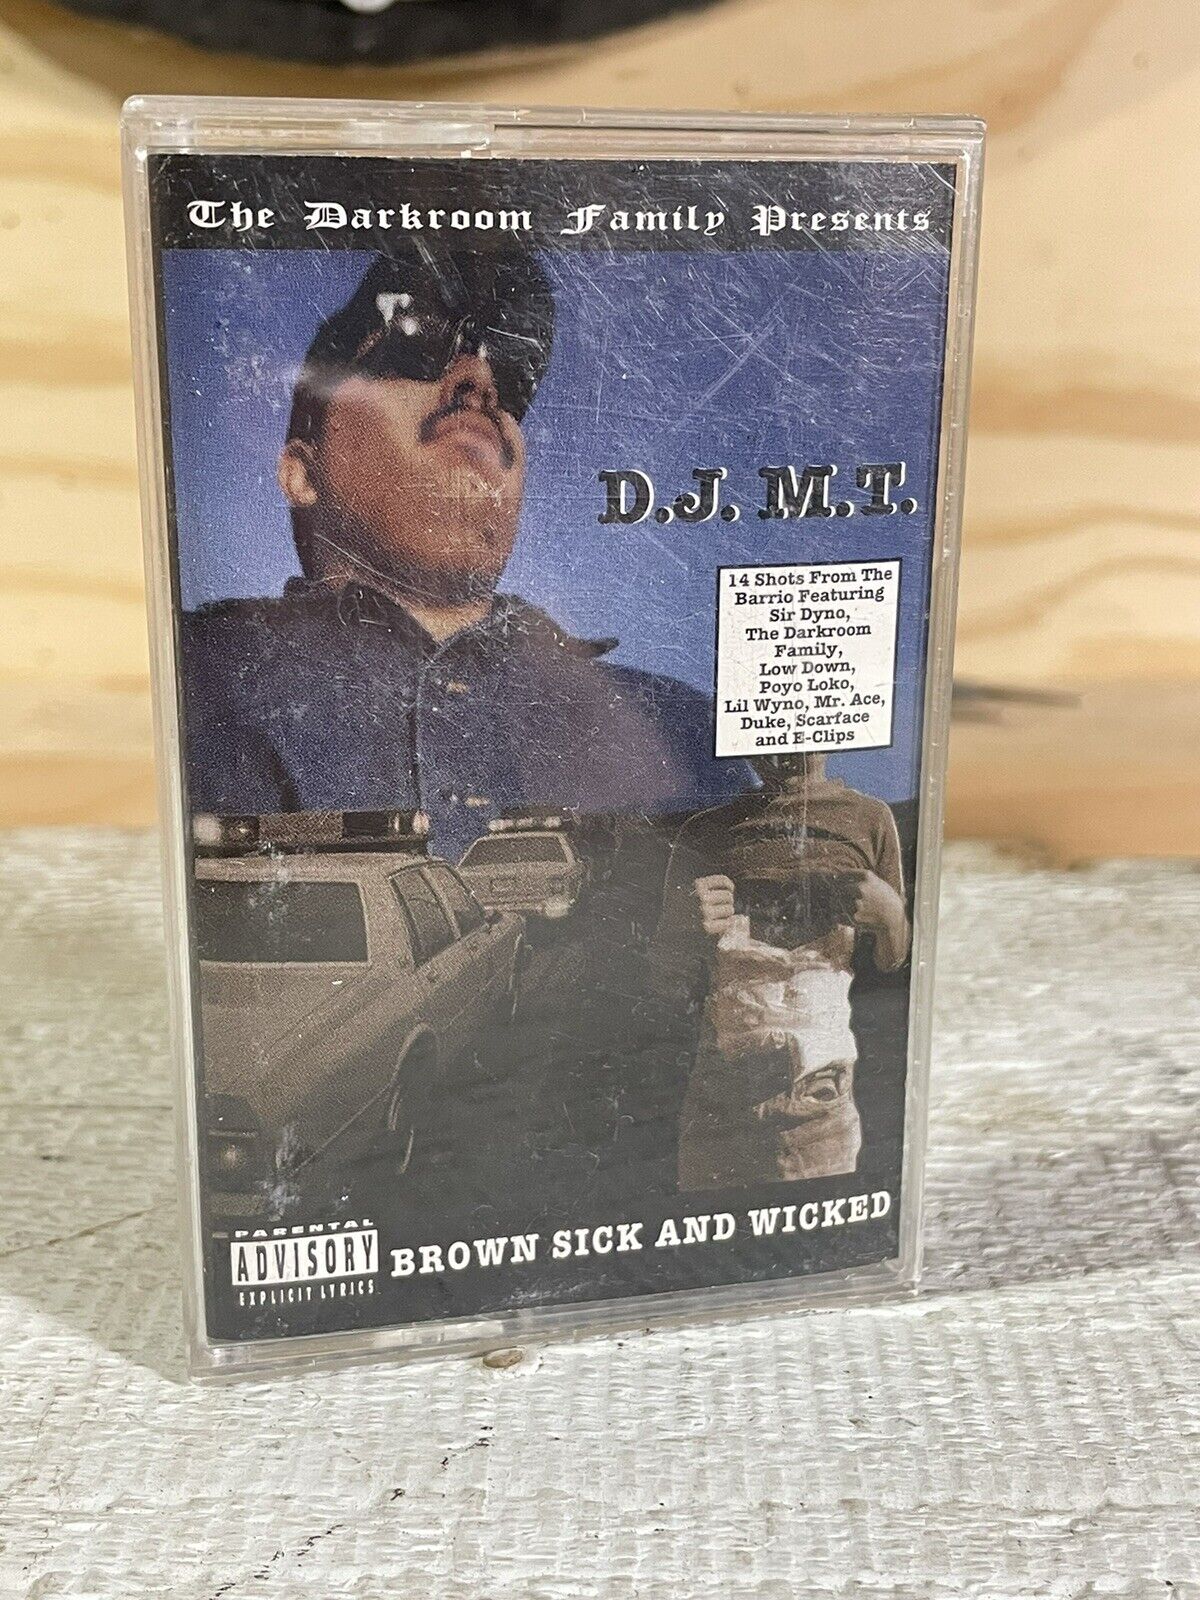 D.J. M.T. Brown Sick And Wicked Cassette OOP HTF Darkroom Family Familia Latino